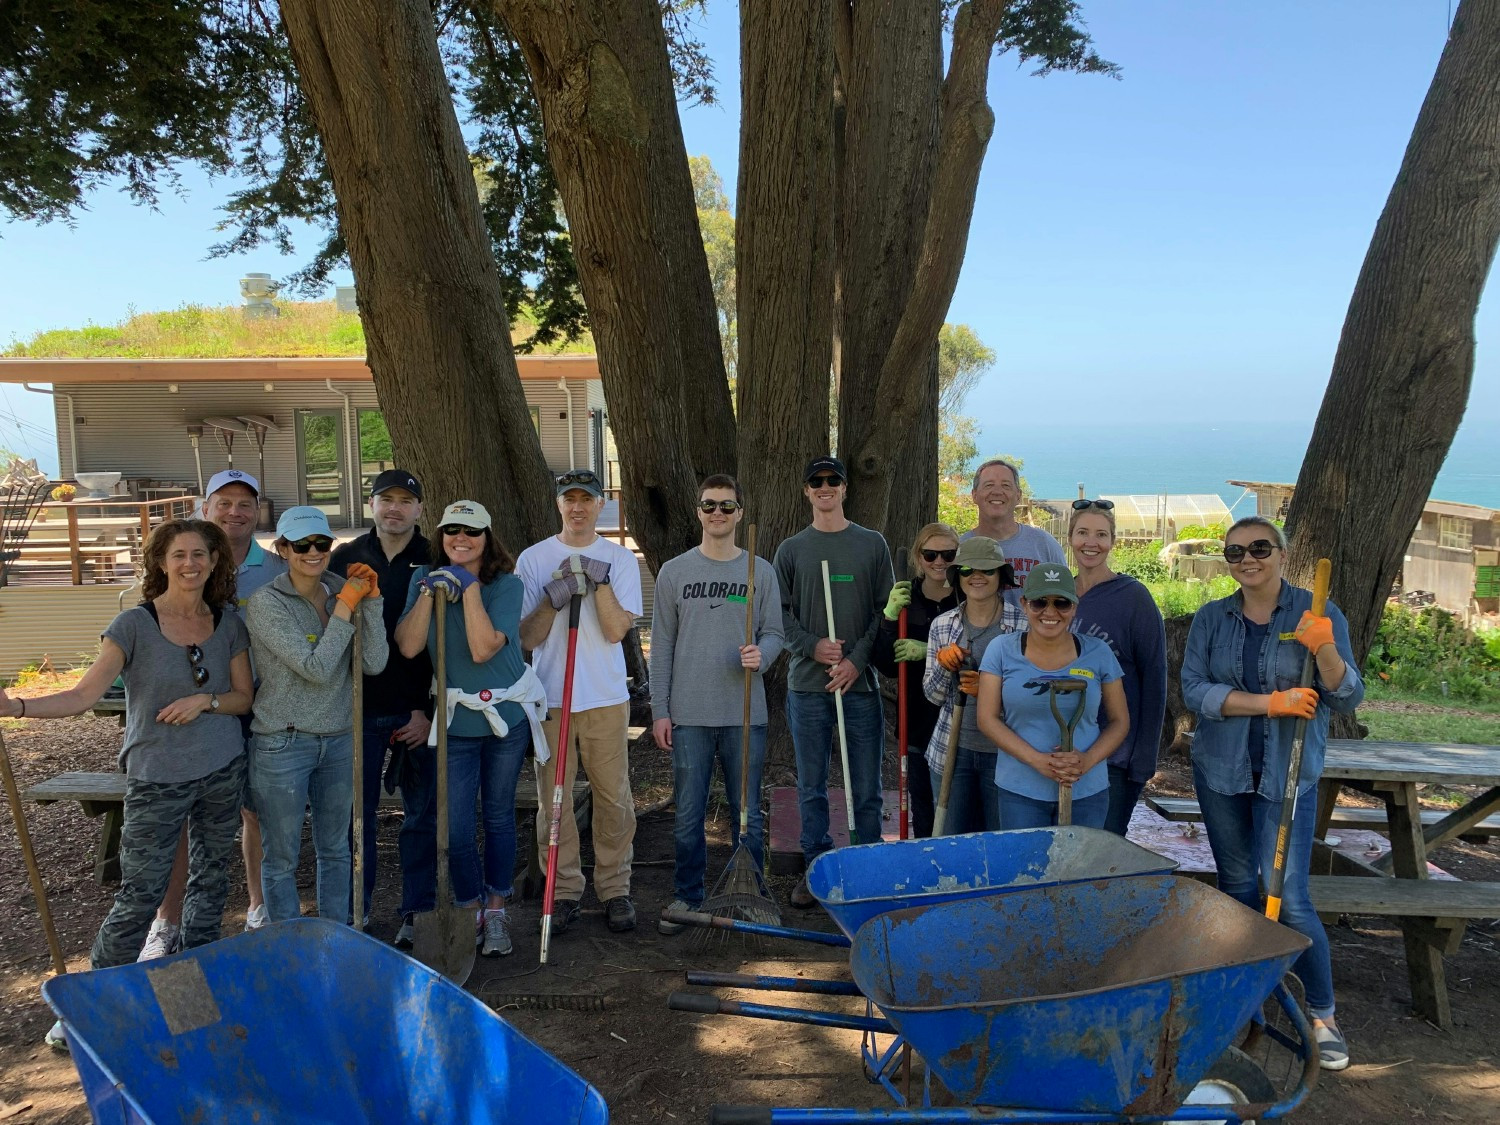 Gilmartin employees giving back to the local community in the Bay Area, supporting environmental conservation efforts.